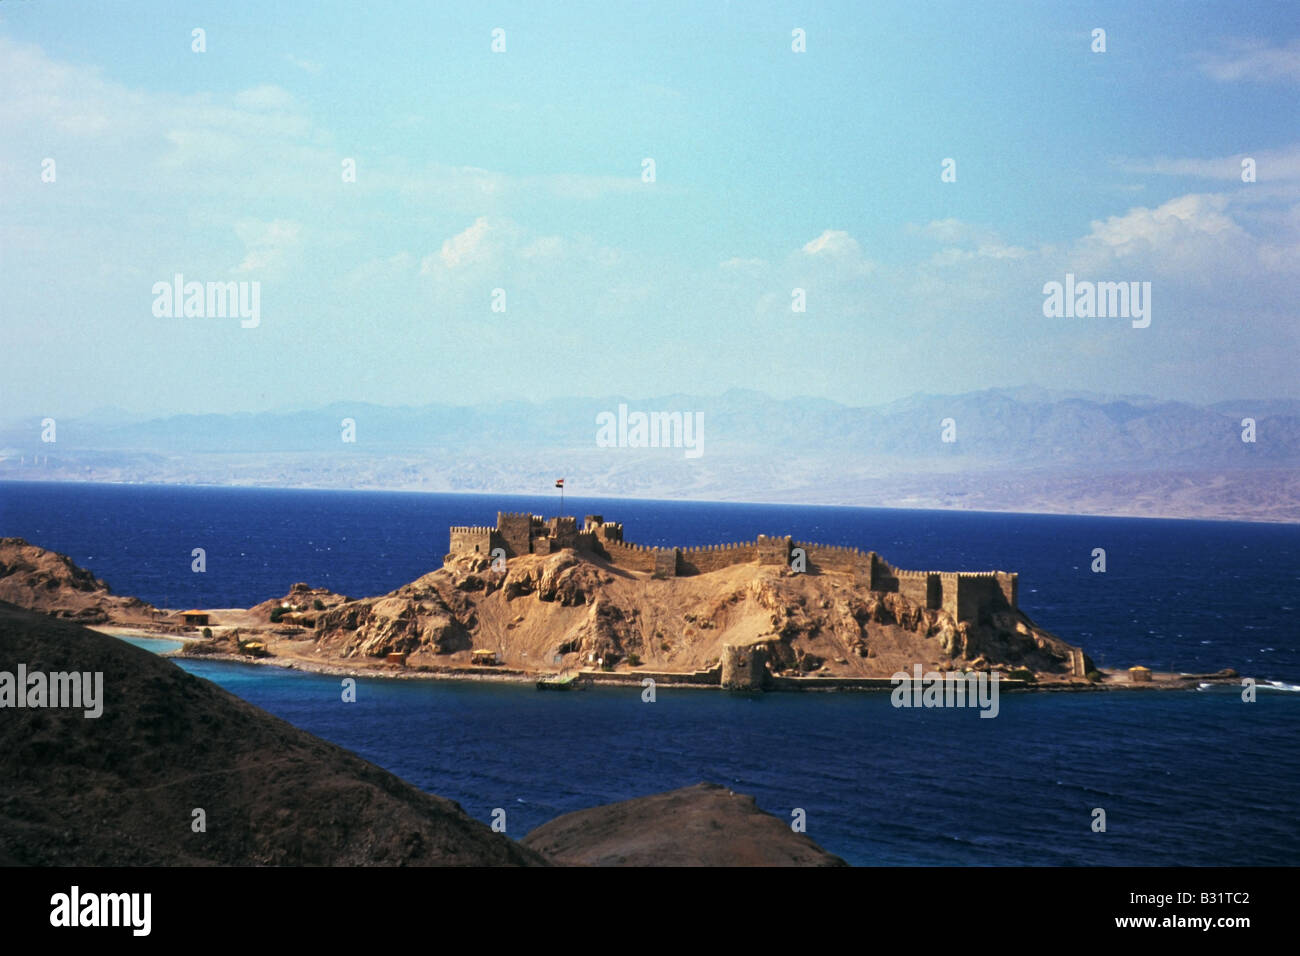 The amazing Pharaoh's Island / coral island in the Gulf of Aqaba ,Red sea, Egypt Stock Photo